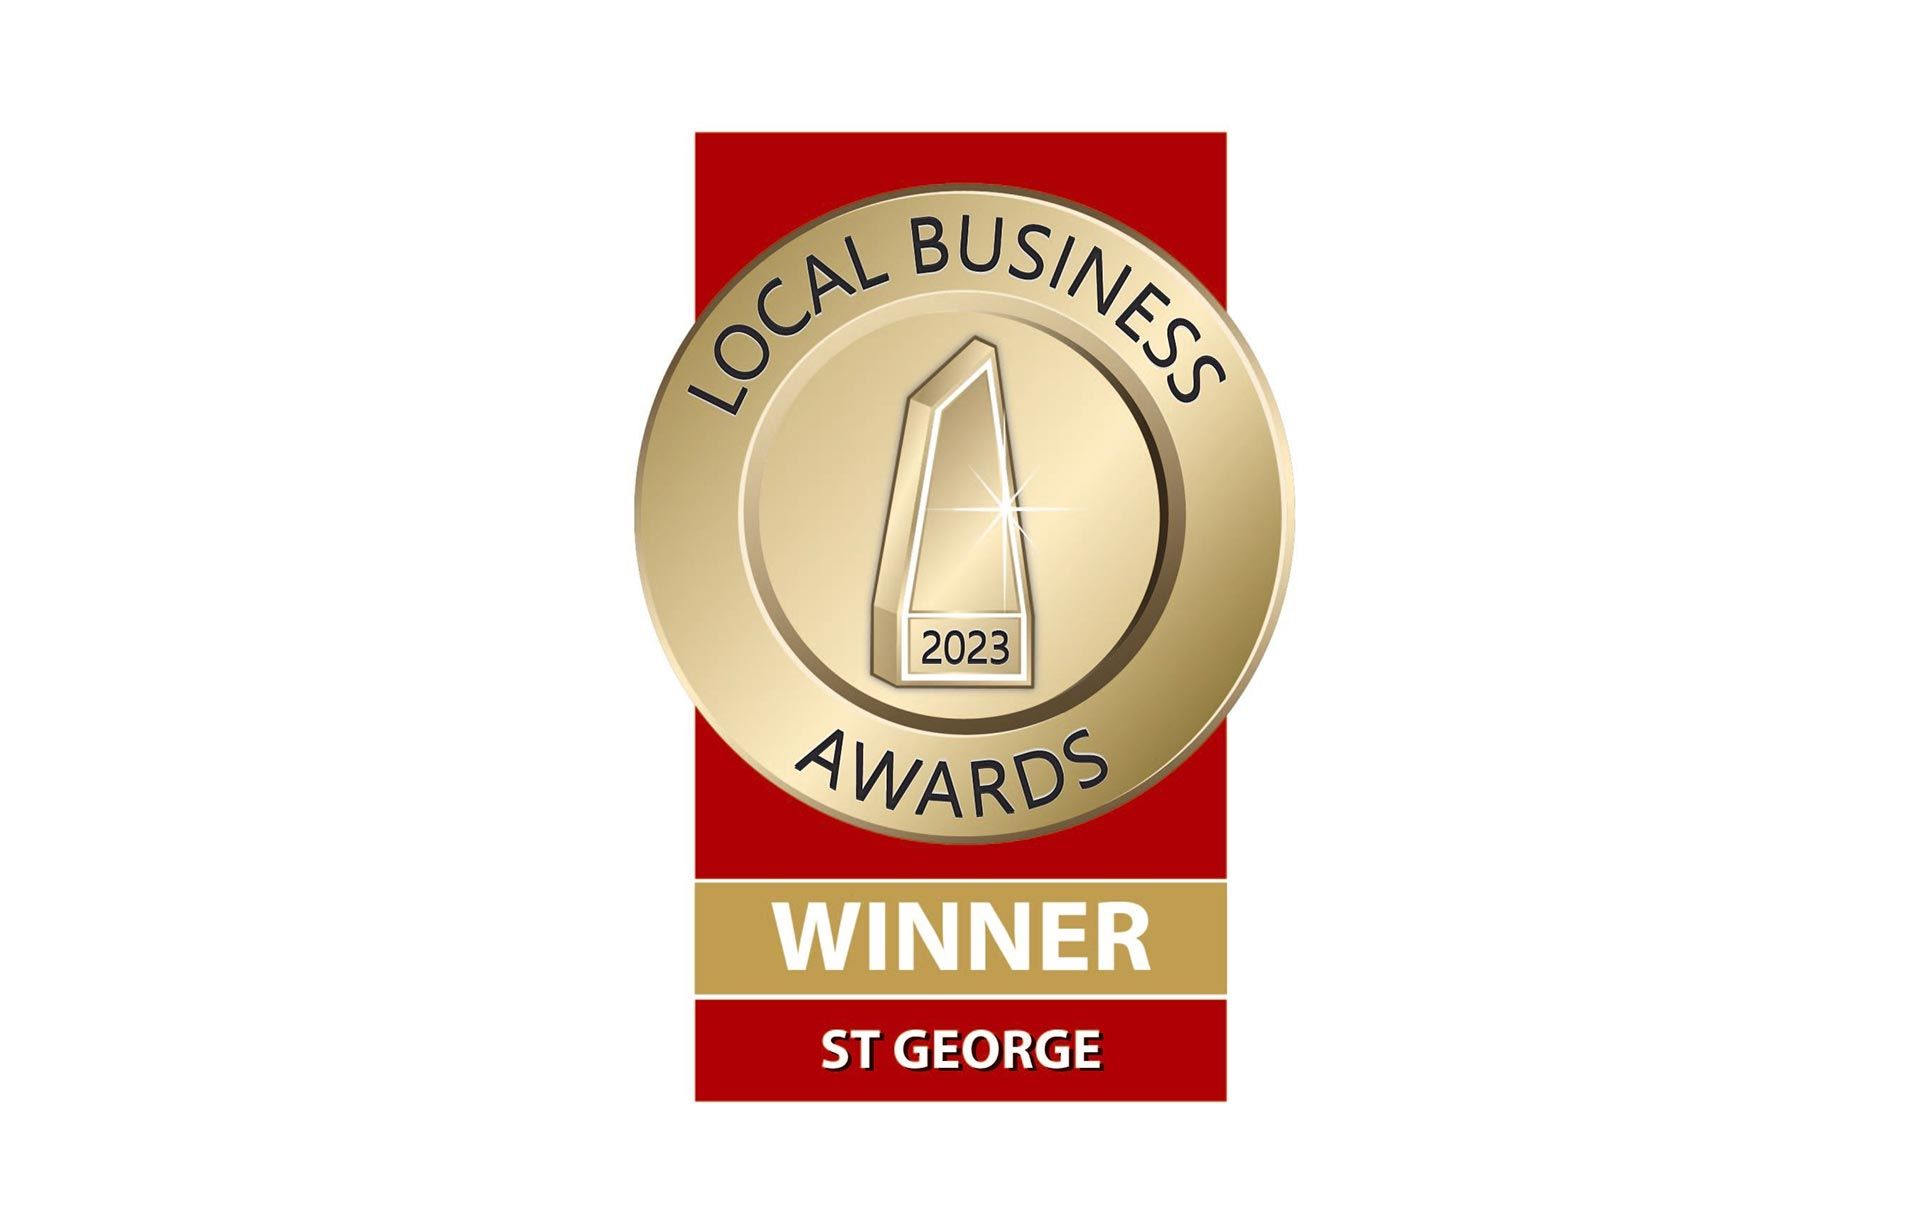 a logo for local business awards winner st george